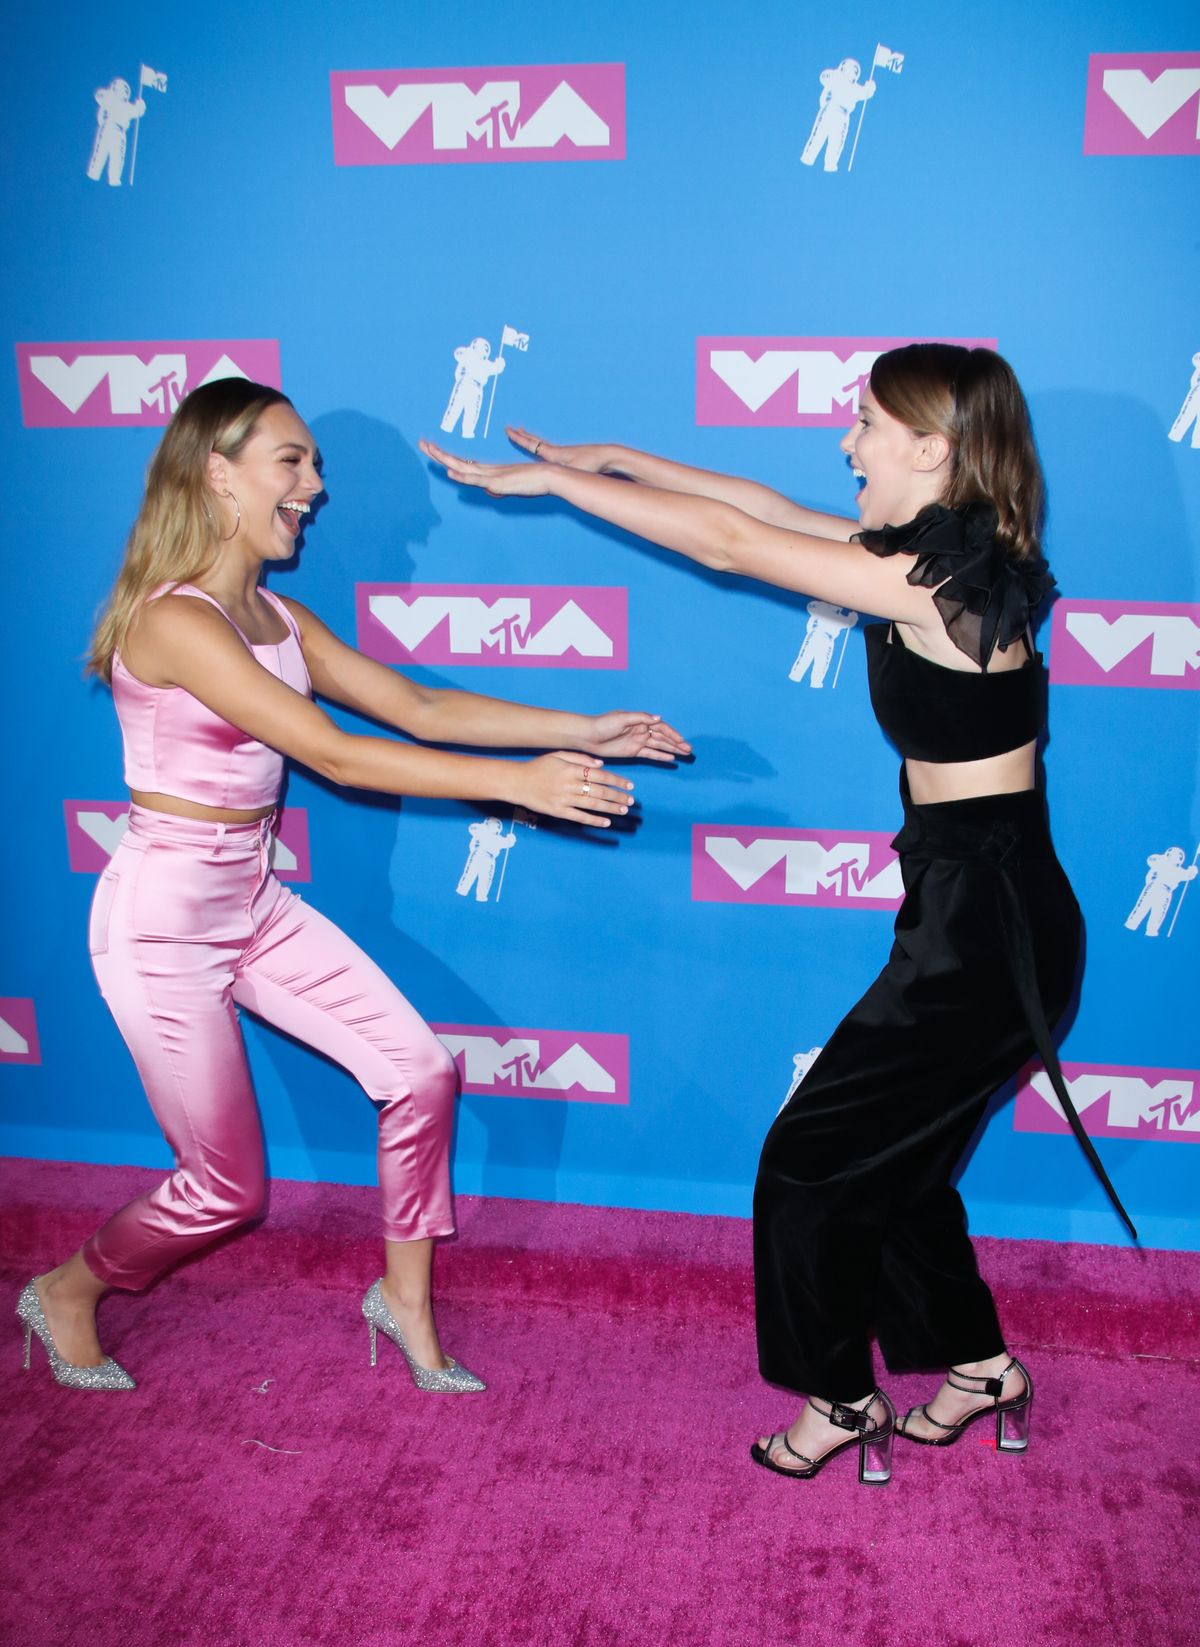 Maddie Ziegler and Millie Bobby Brown at the VMAs